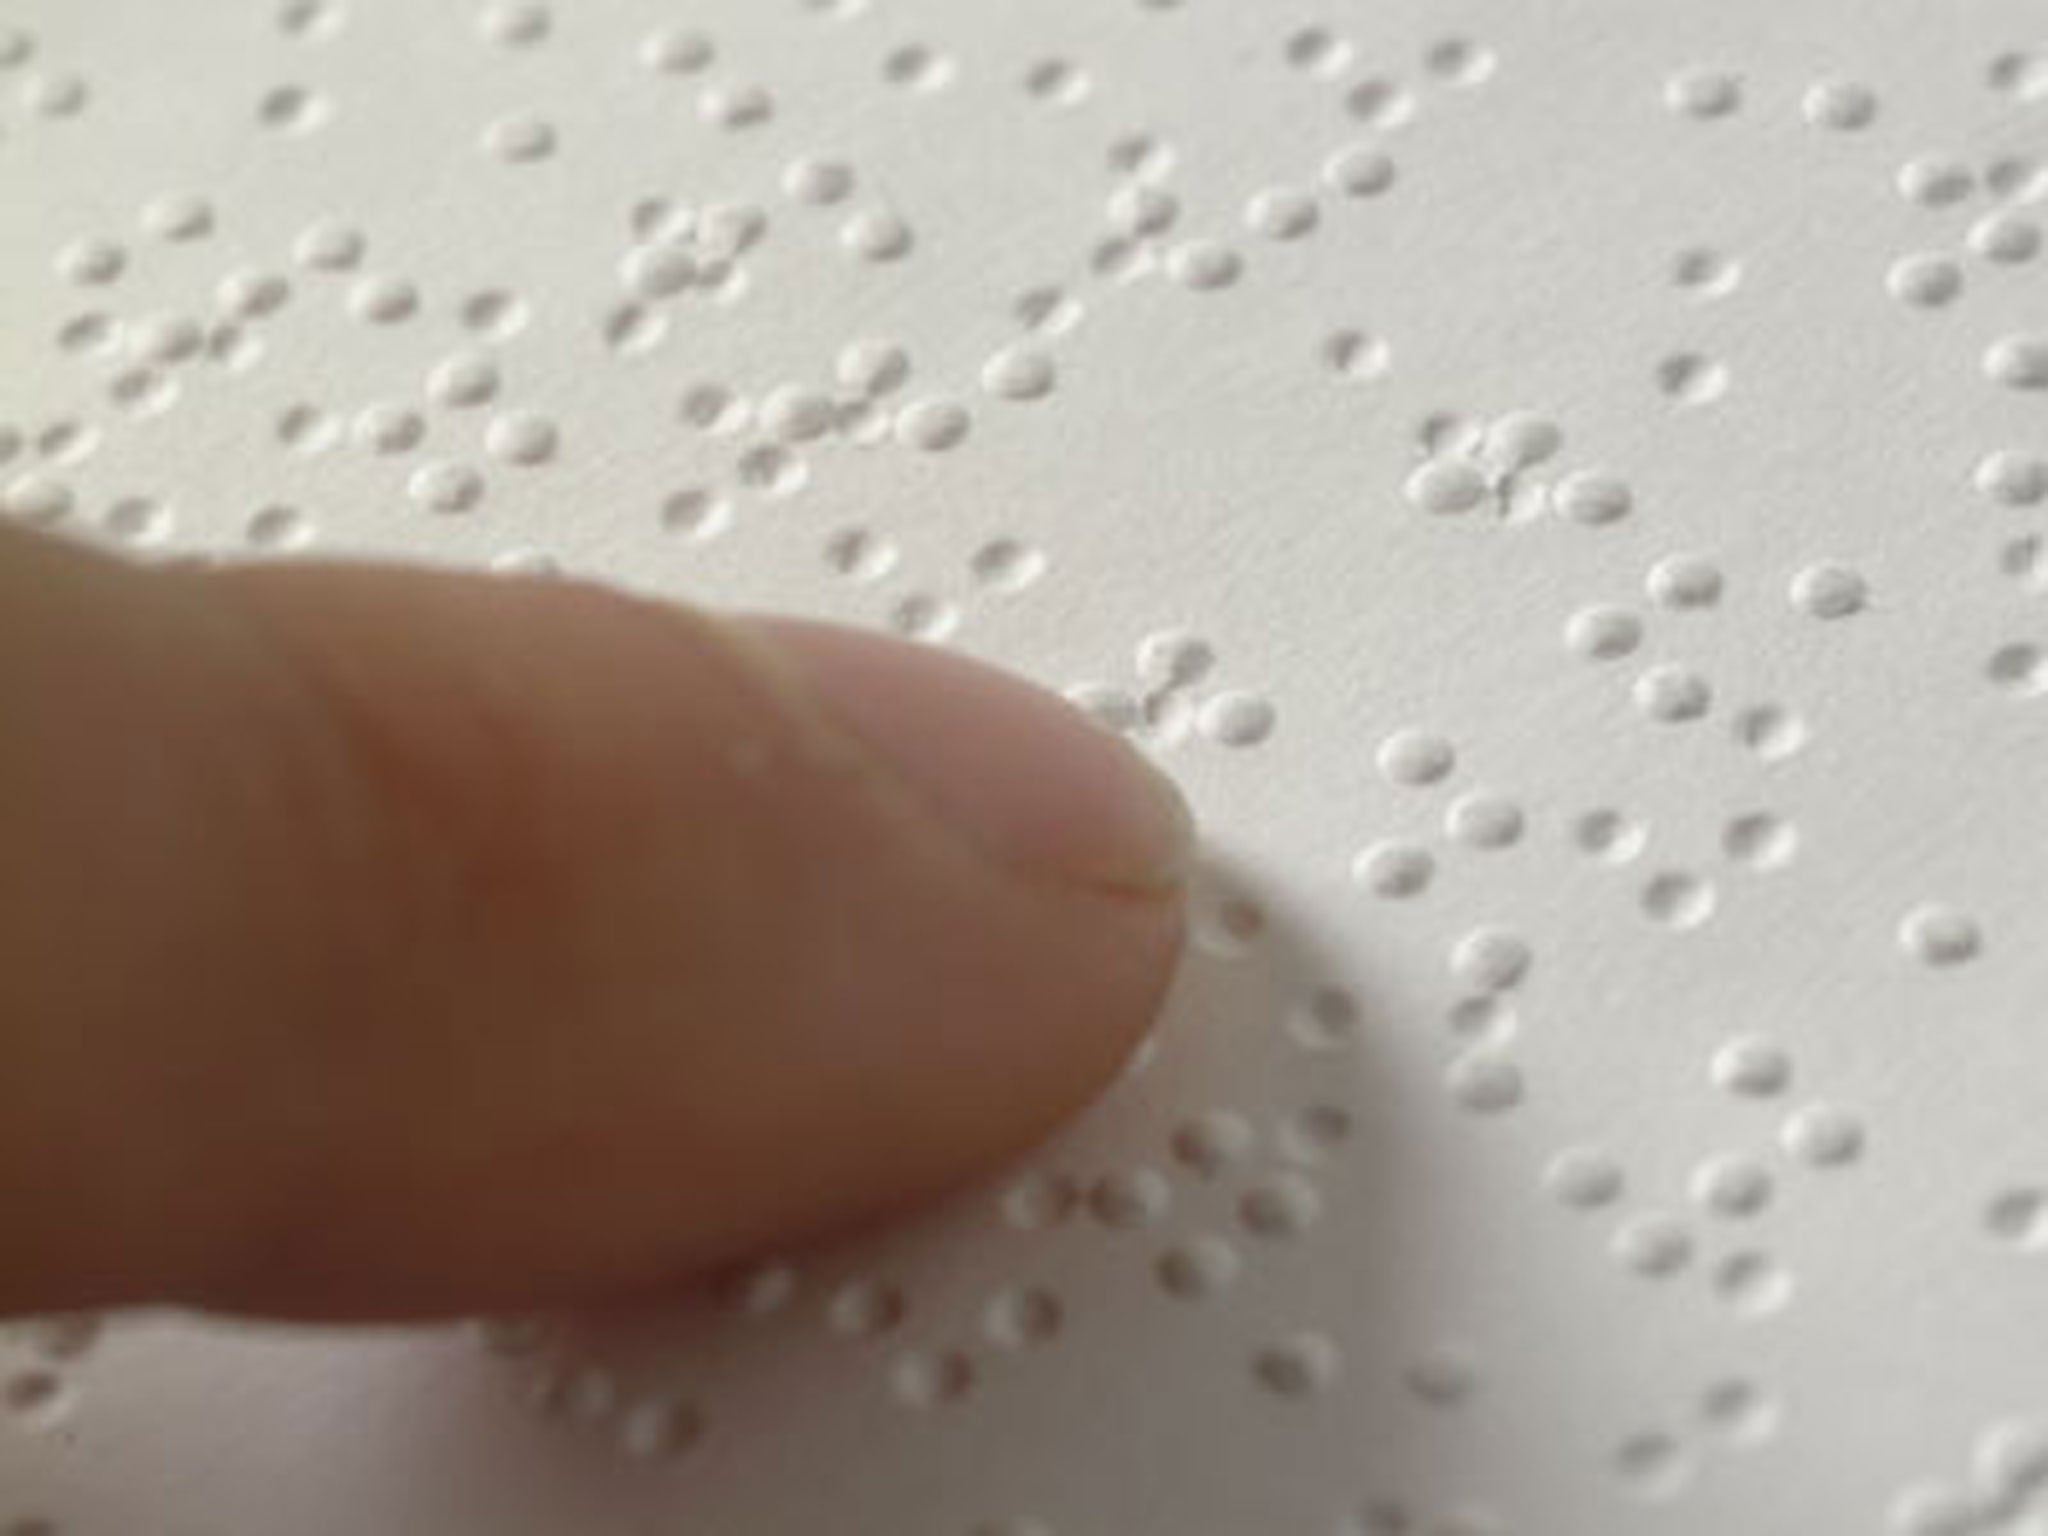 A blind person uses braille to read